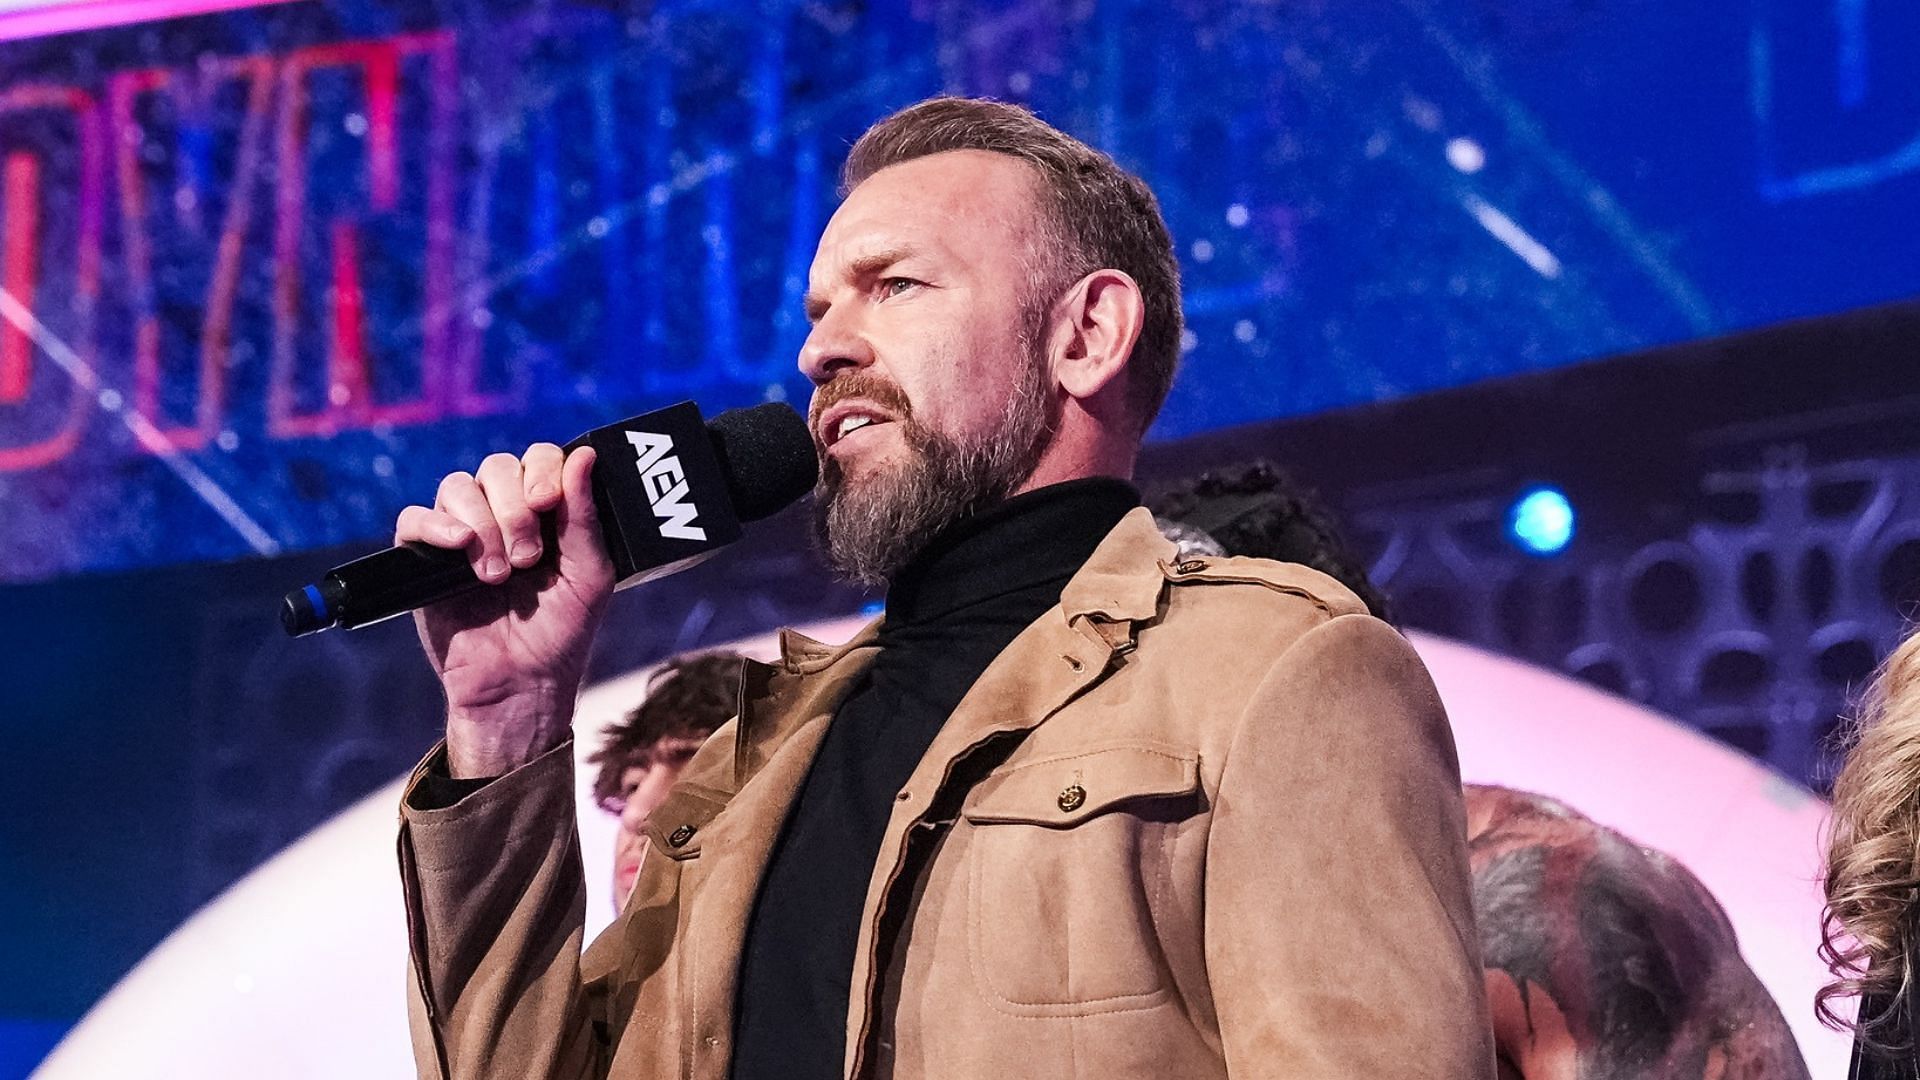 Christian Cage is a former WWE superstar who is now with AEW [photo courtesy of AEW